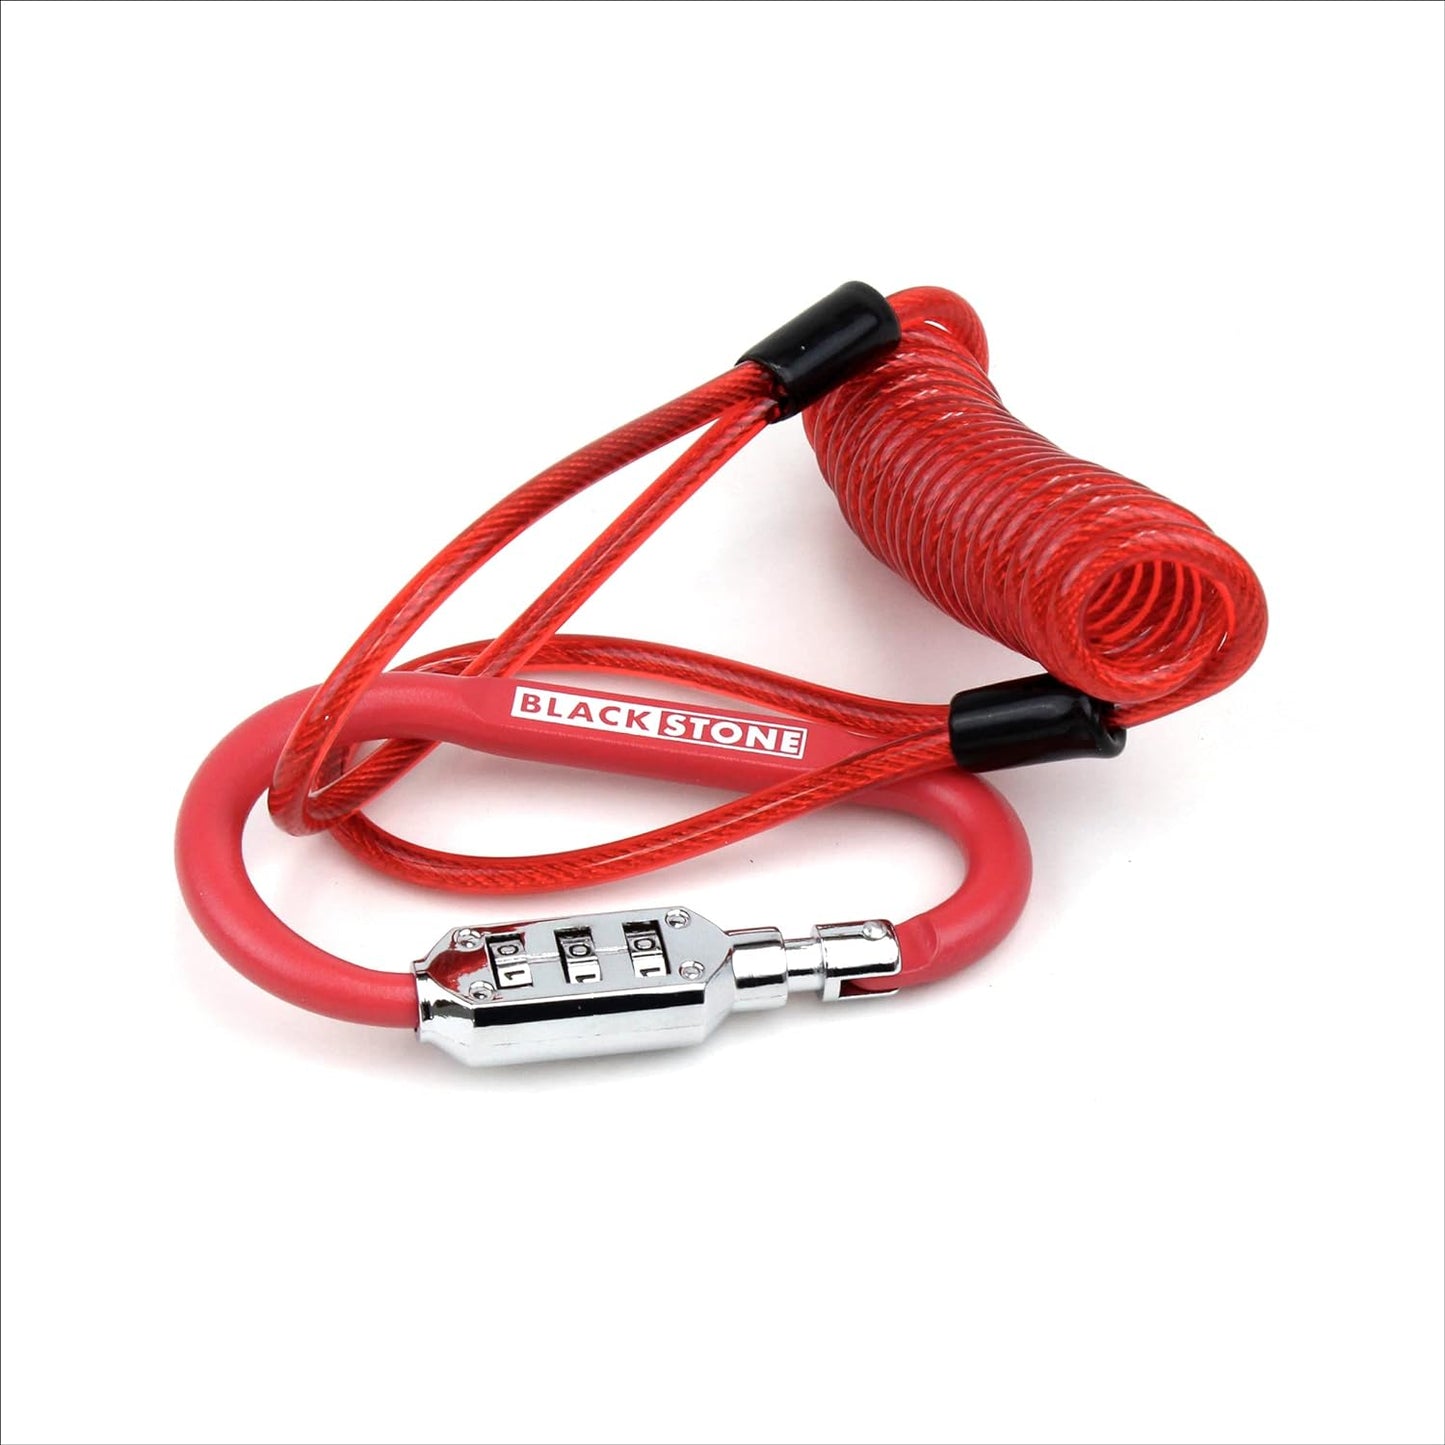 Red Black Stone brand bike lock with combination padlock and coiled cable on a white background